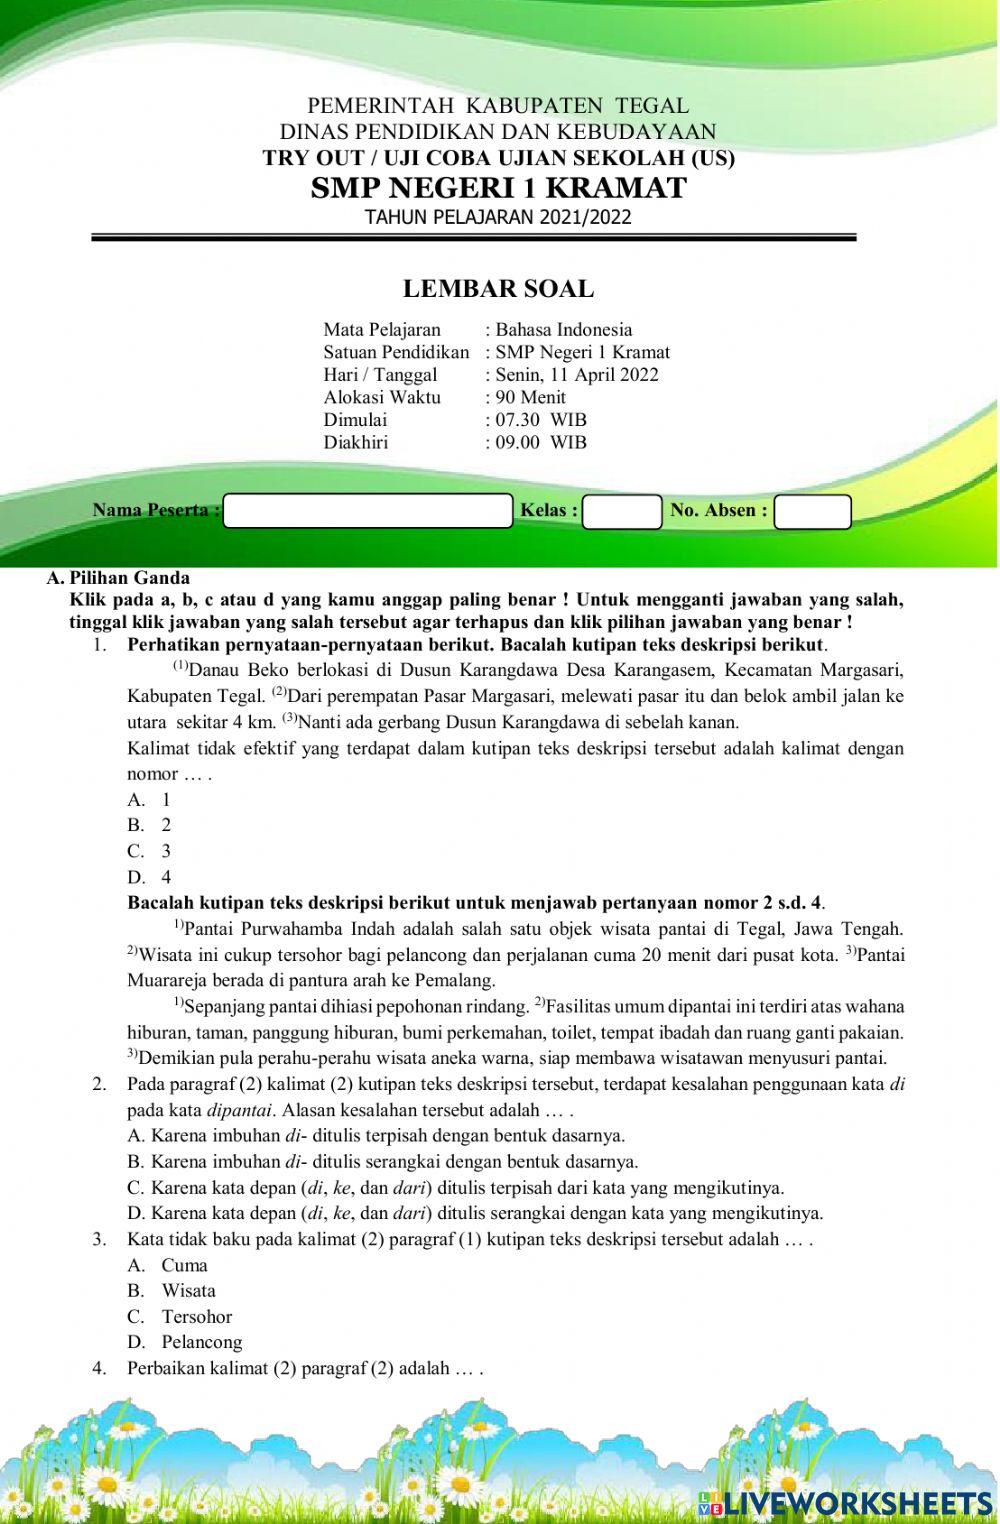 Try Out bahasa Indonesia